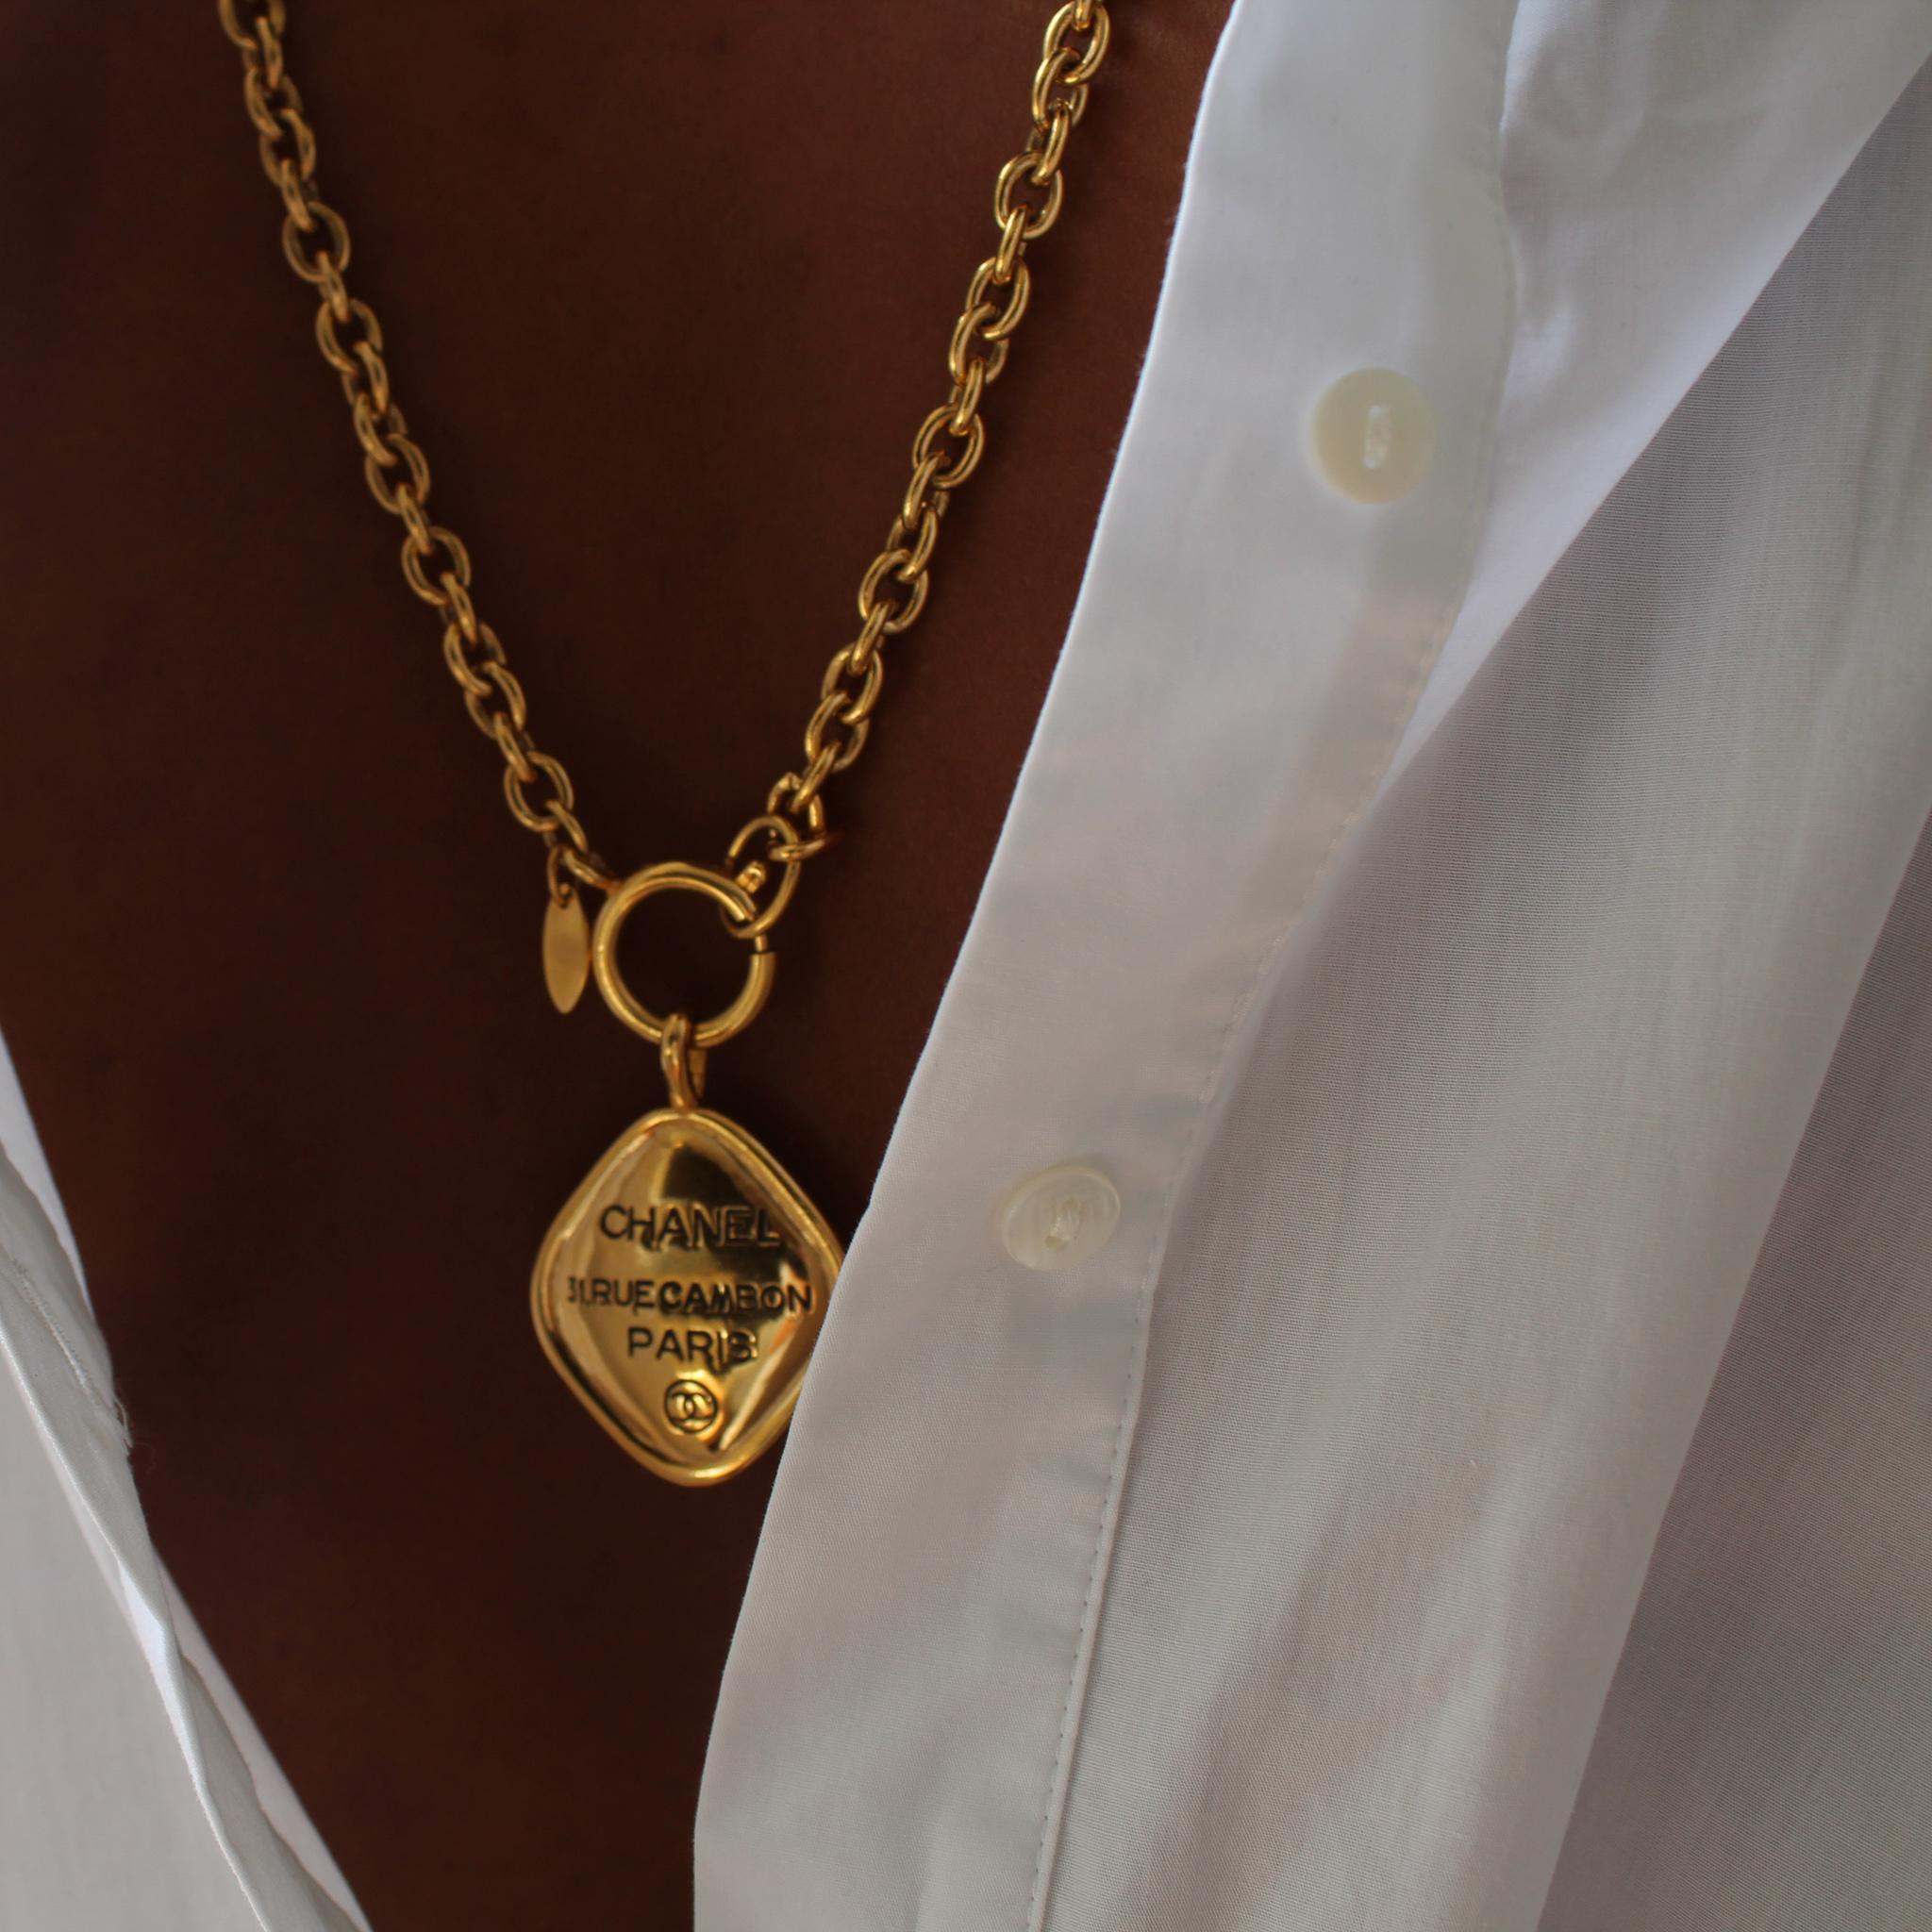 Vintage Chanel Necklace 1980s

Iconic Rue Cambon 24 karat gold-plated pendant necklace from Chanel, still the world's most in-demand fashion label. Features a substantial belcher chain with a diamond shaped pendant embossed with the legendary